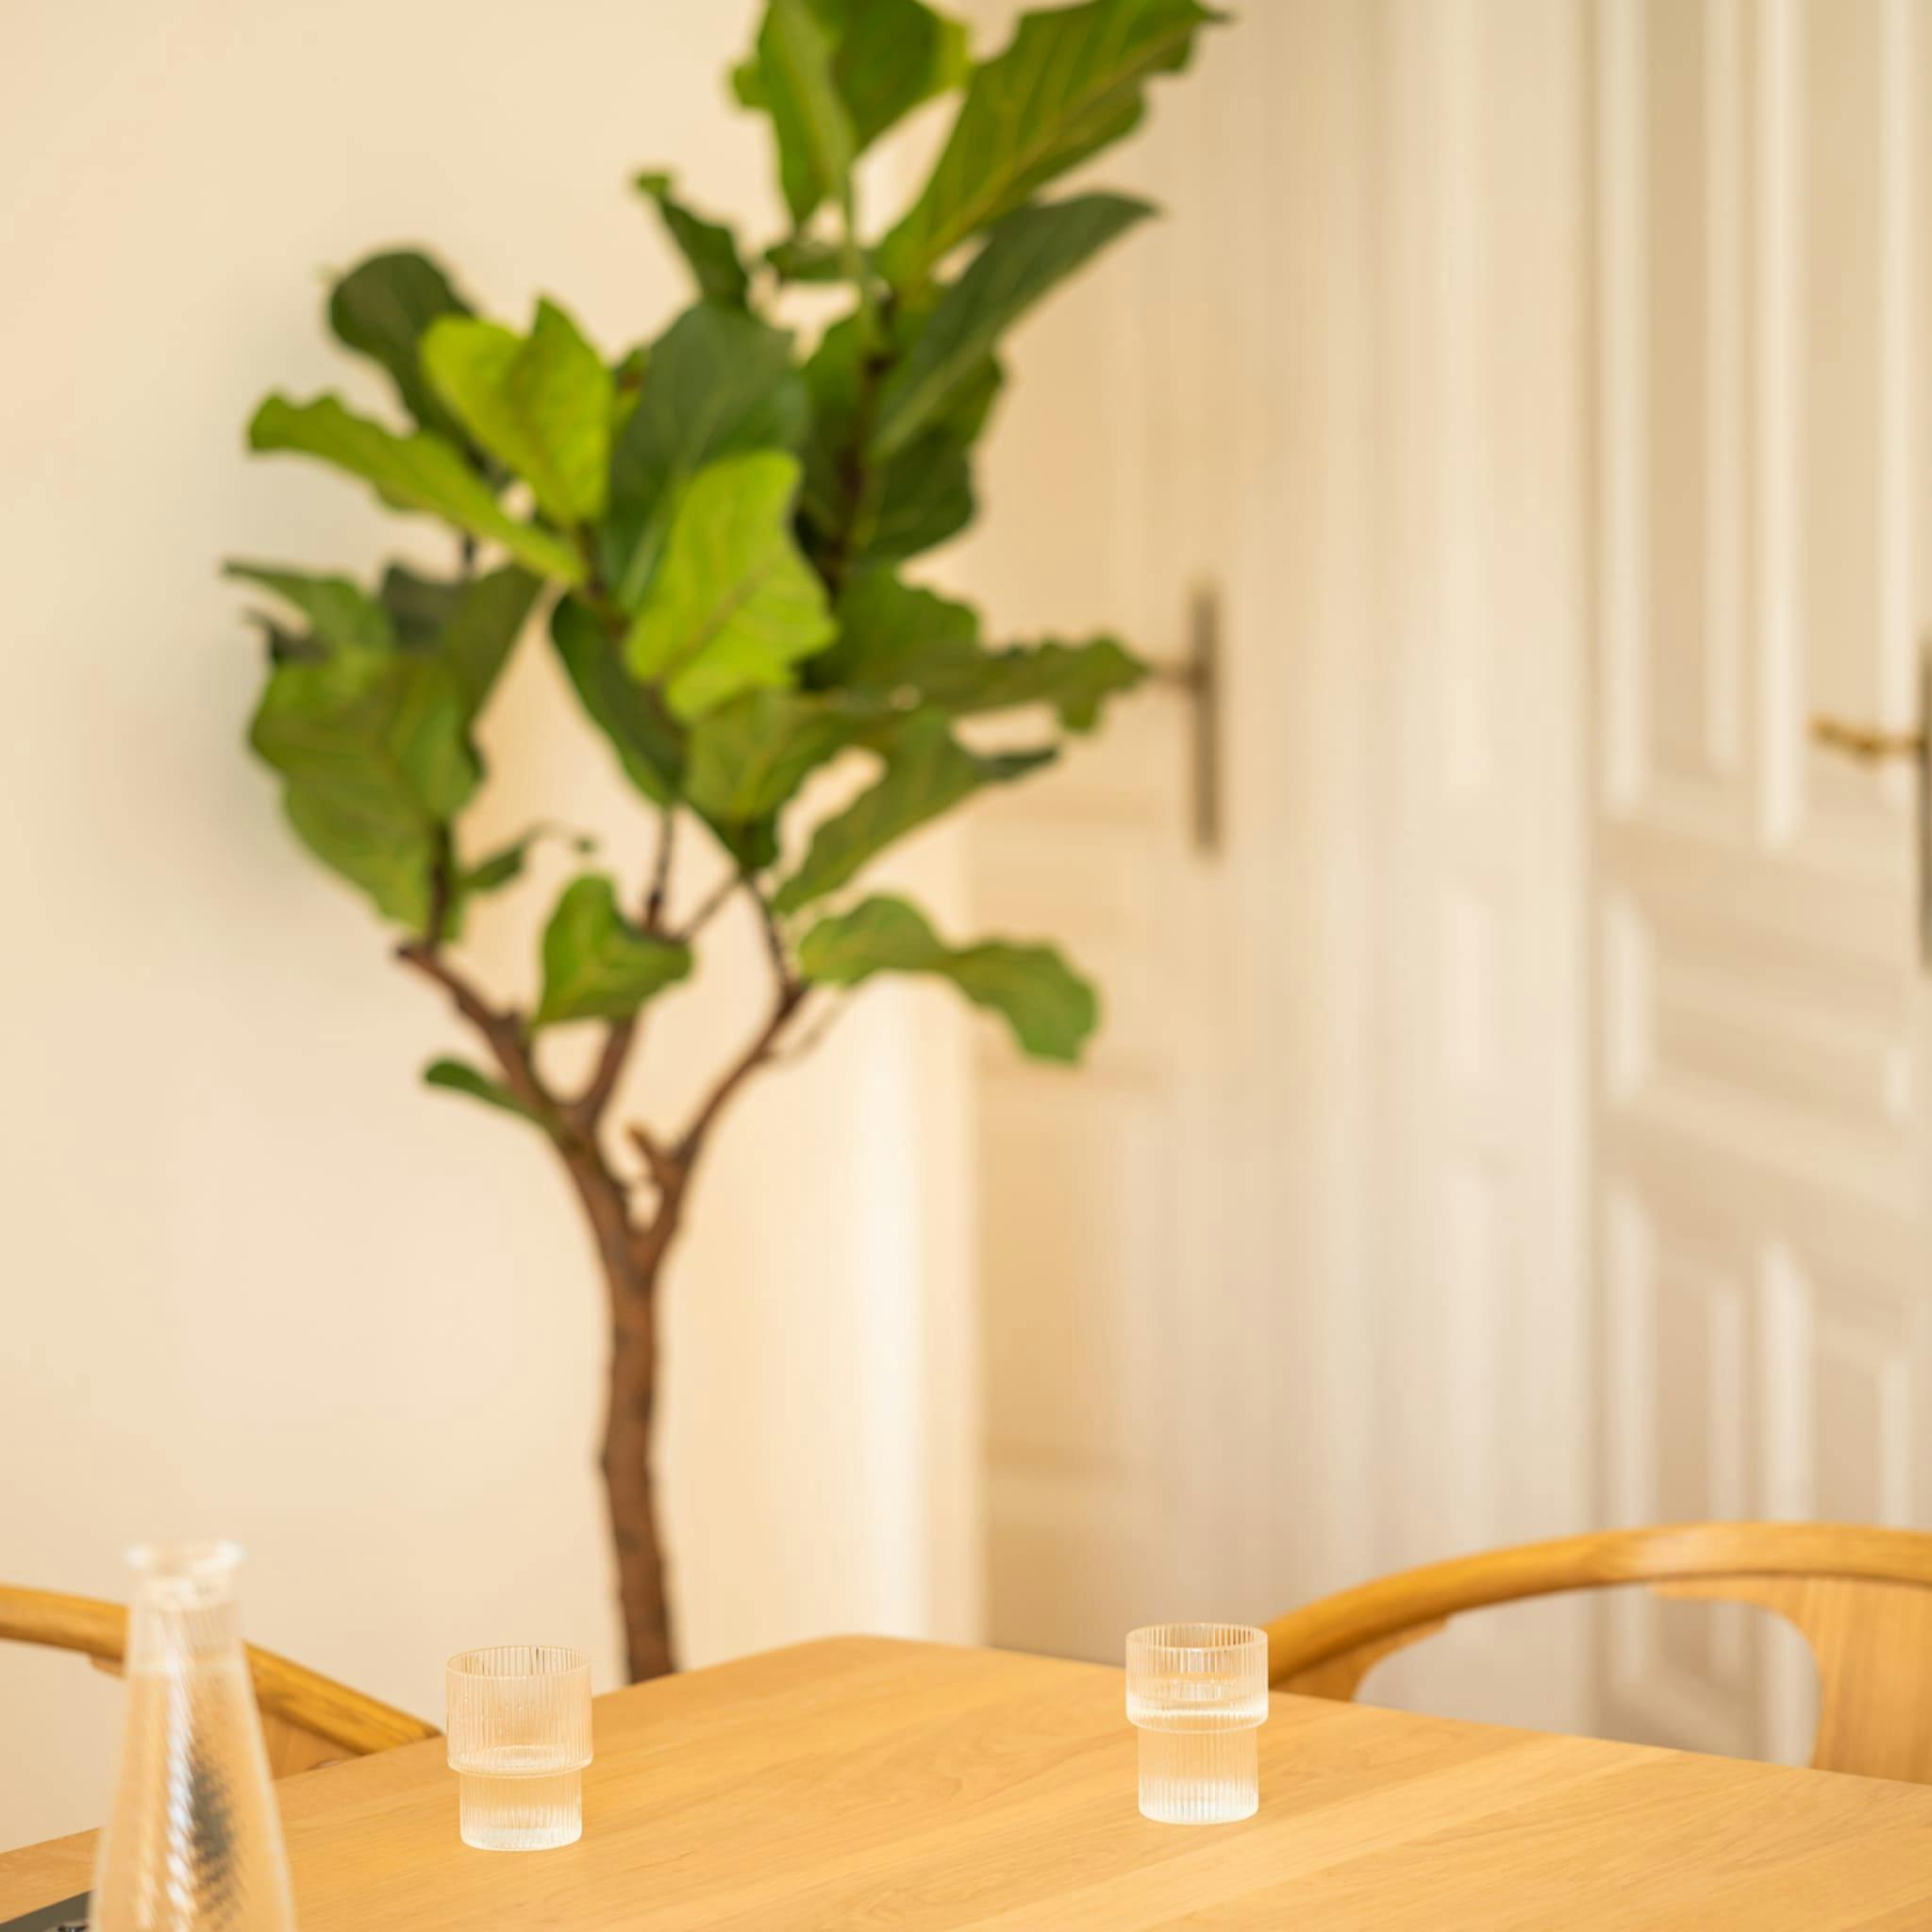 Wooden table with two glasses and a carafe as well as a potted plant in the background, in the Vienna-based digital agency Functn.